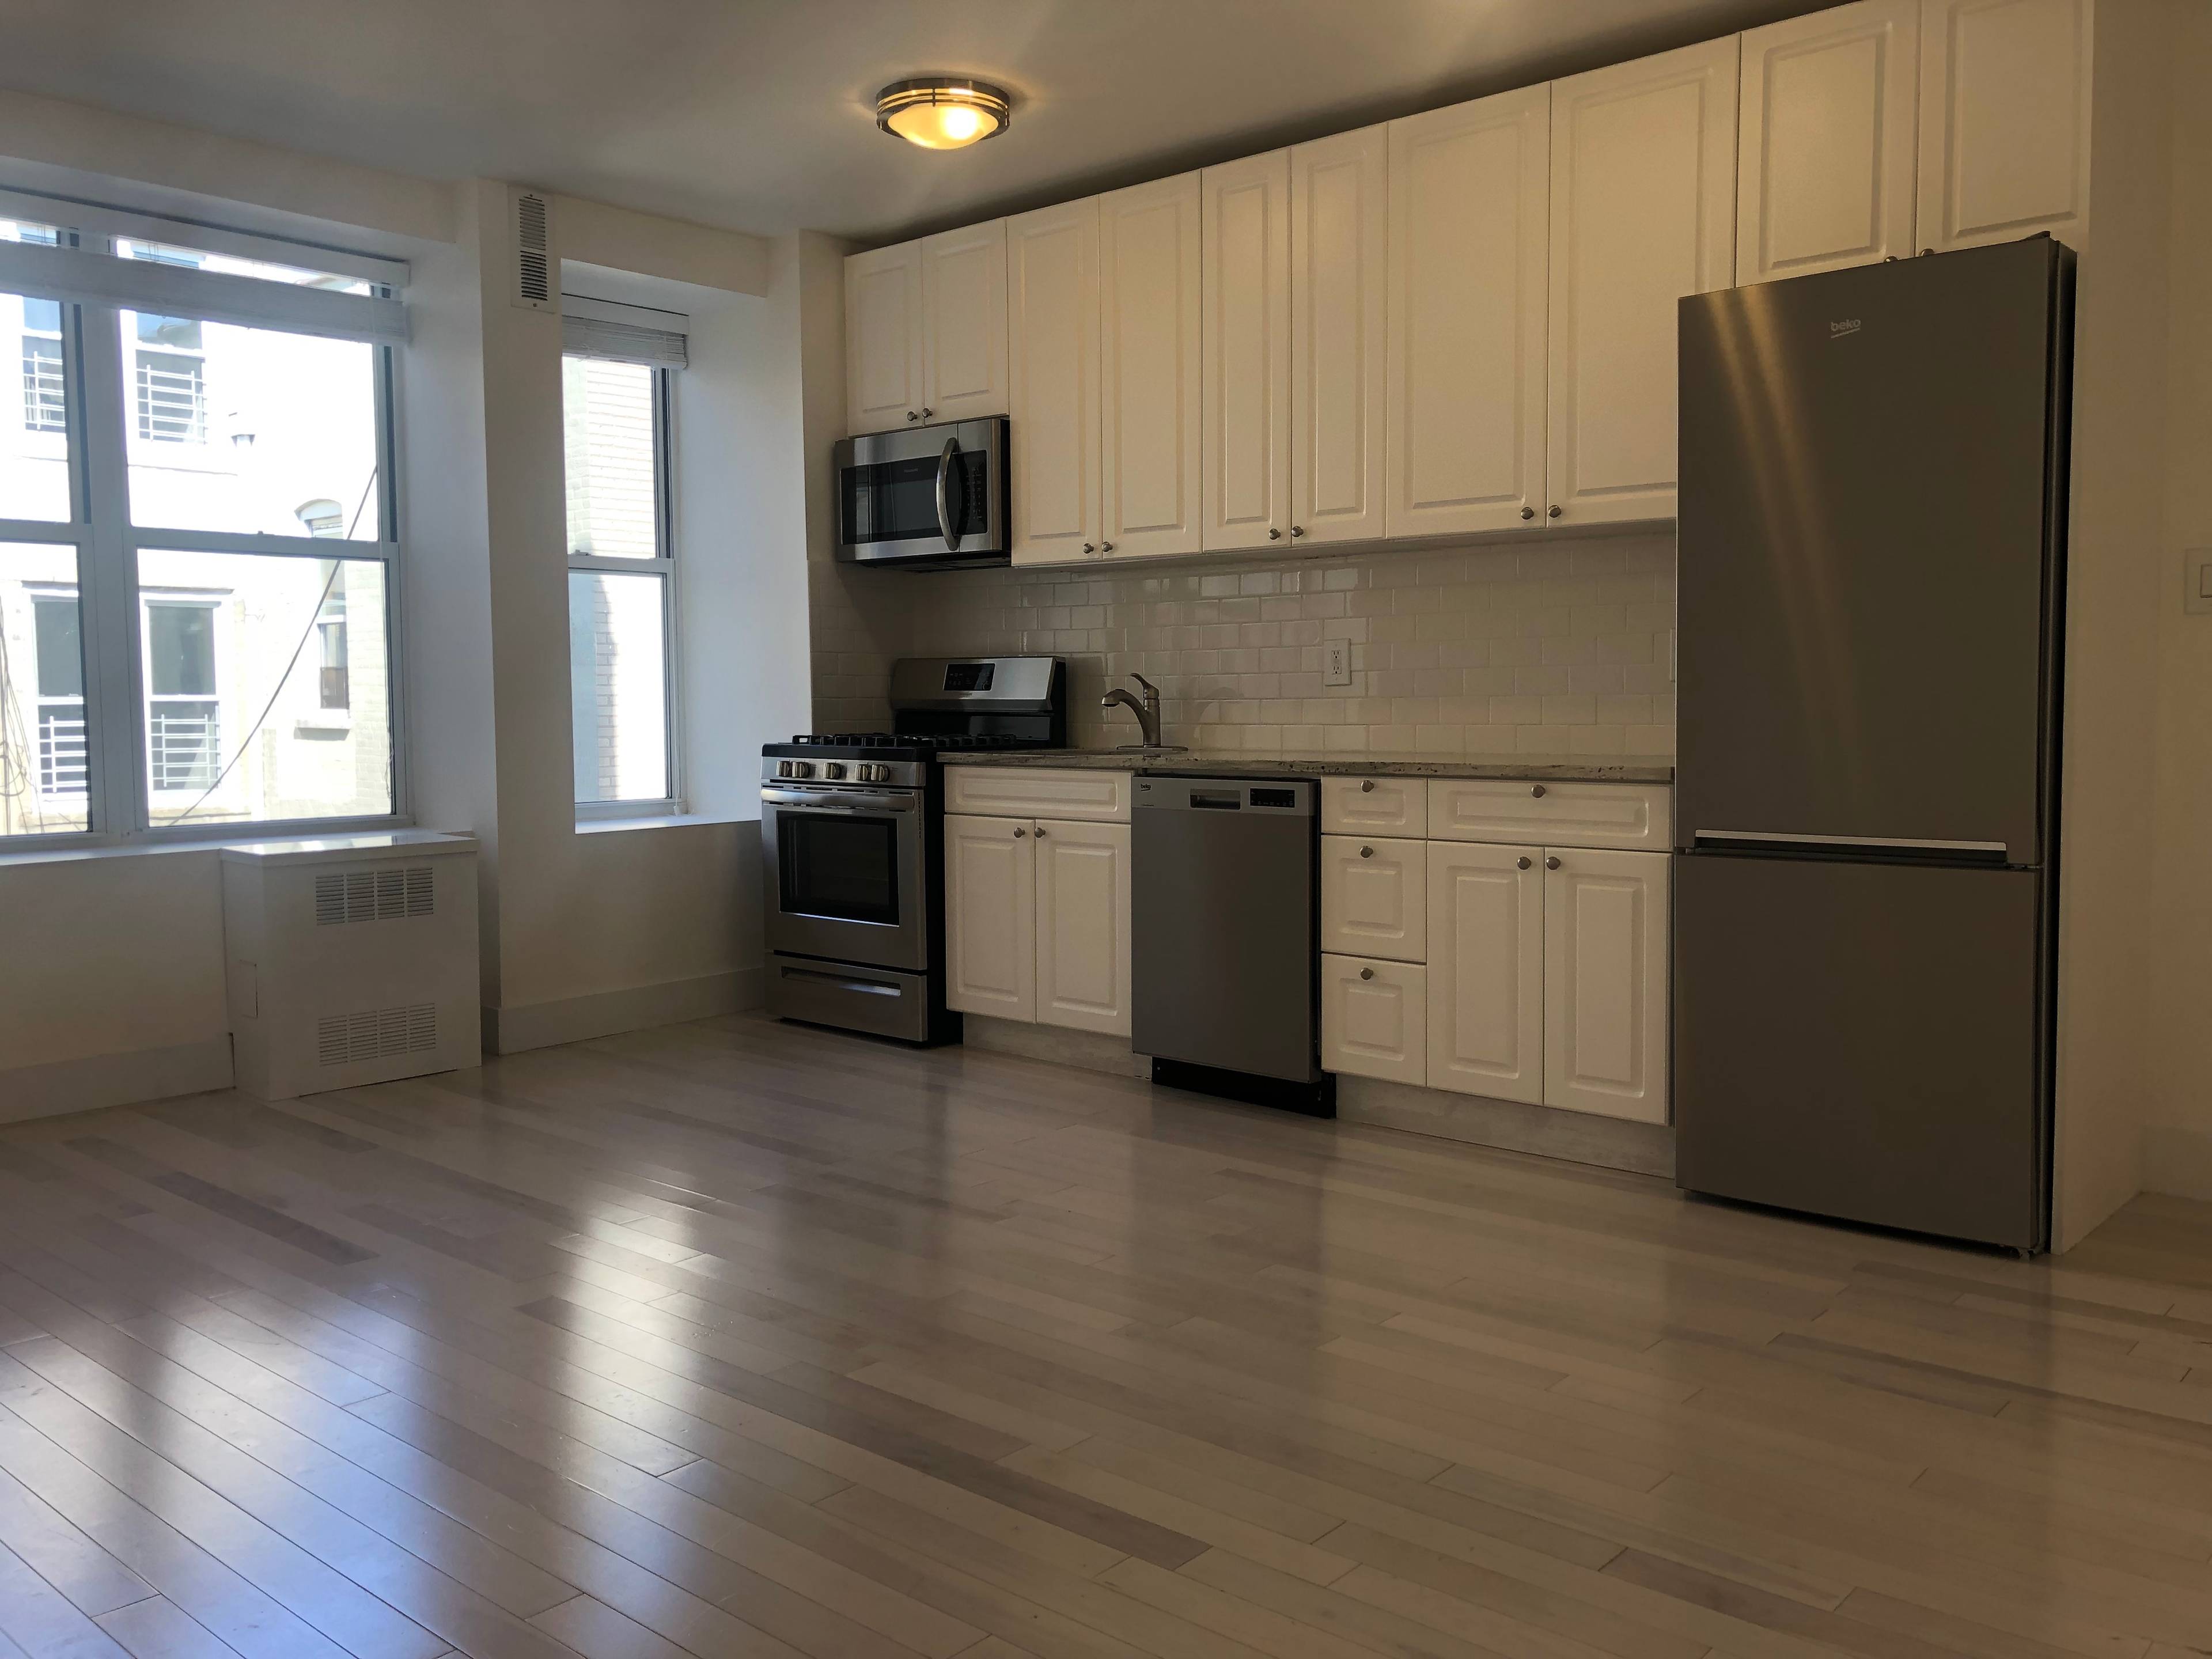 Brand New Spacious 1 Bedroom/1 Bathroom Apartment In Prospect Park South!